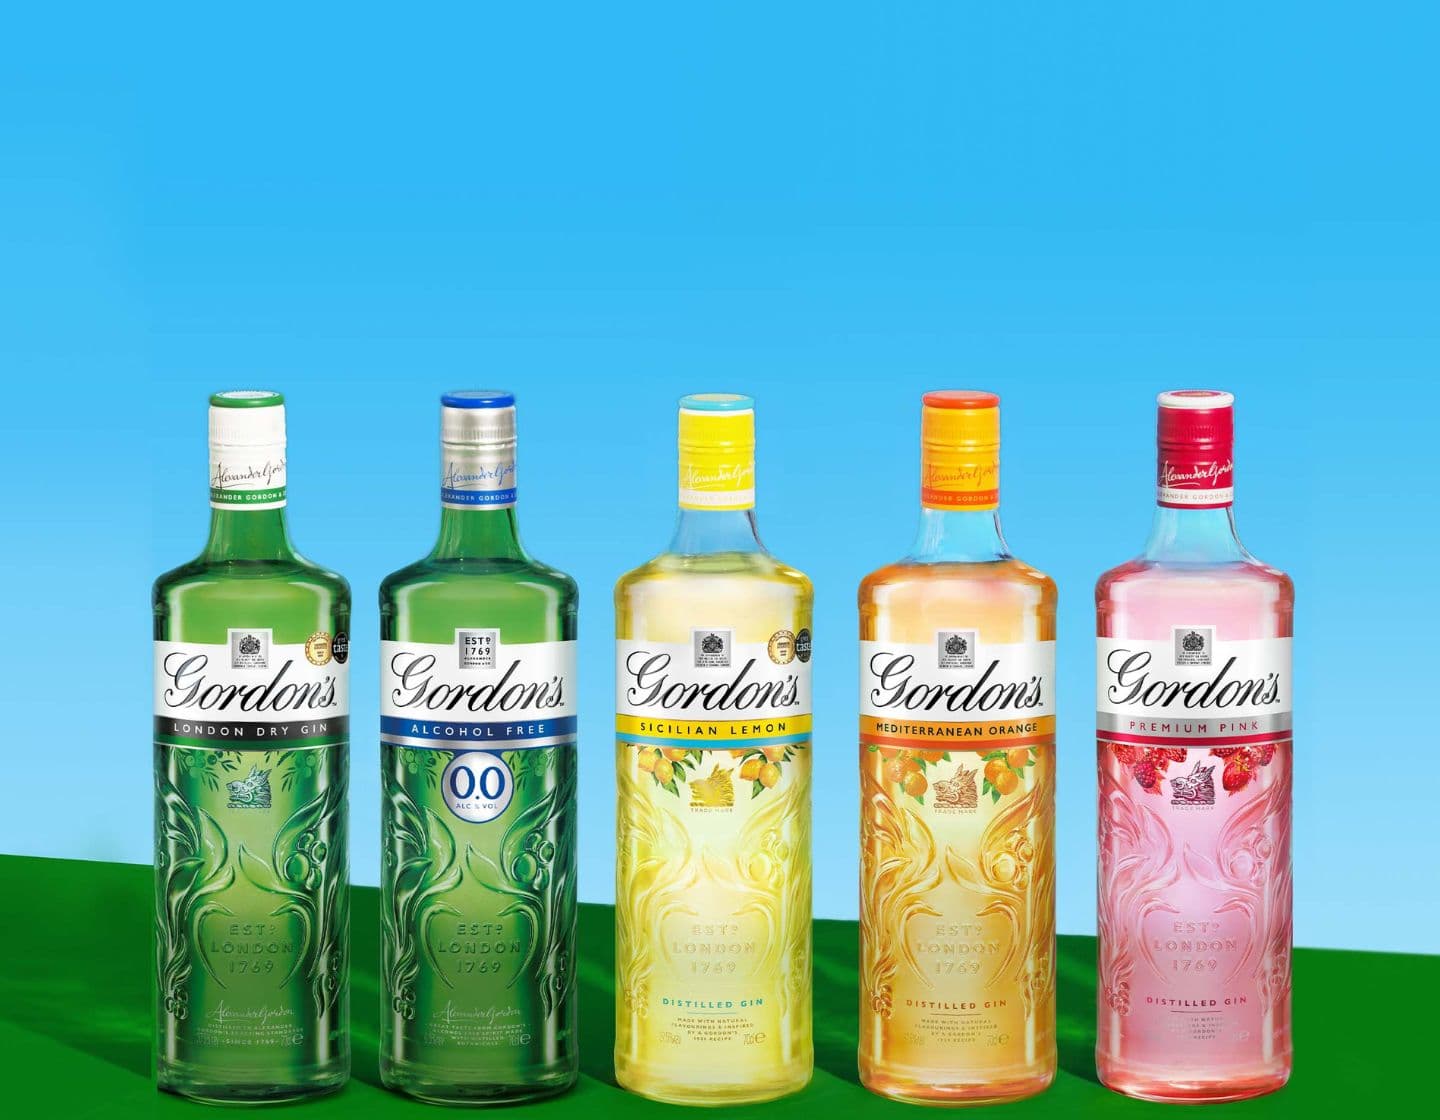 Selection of Gordon’s gin bottles on a blue and yellow background 